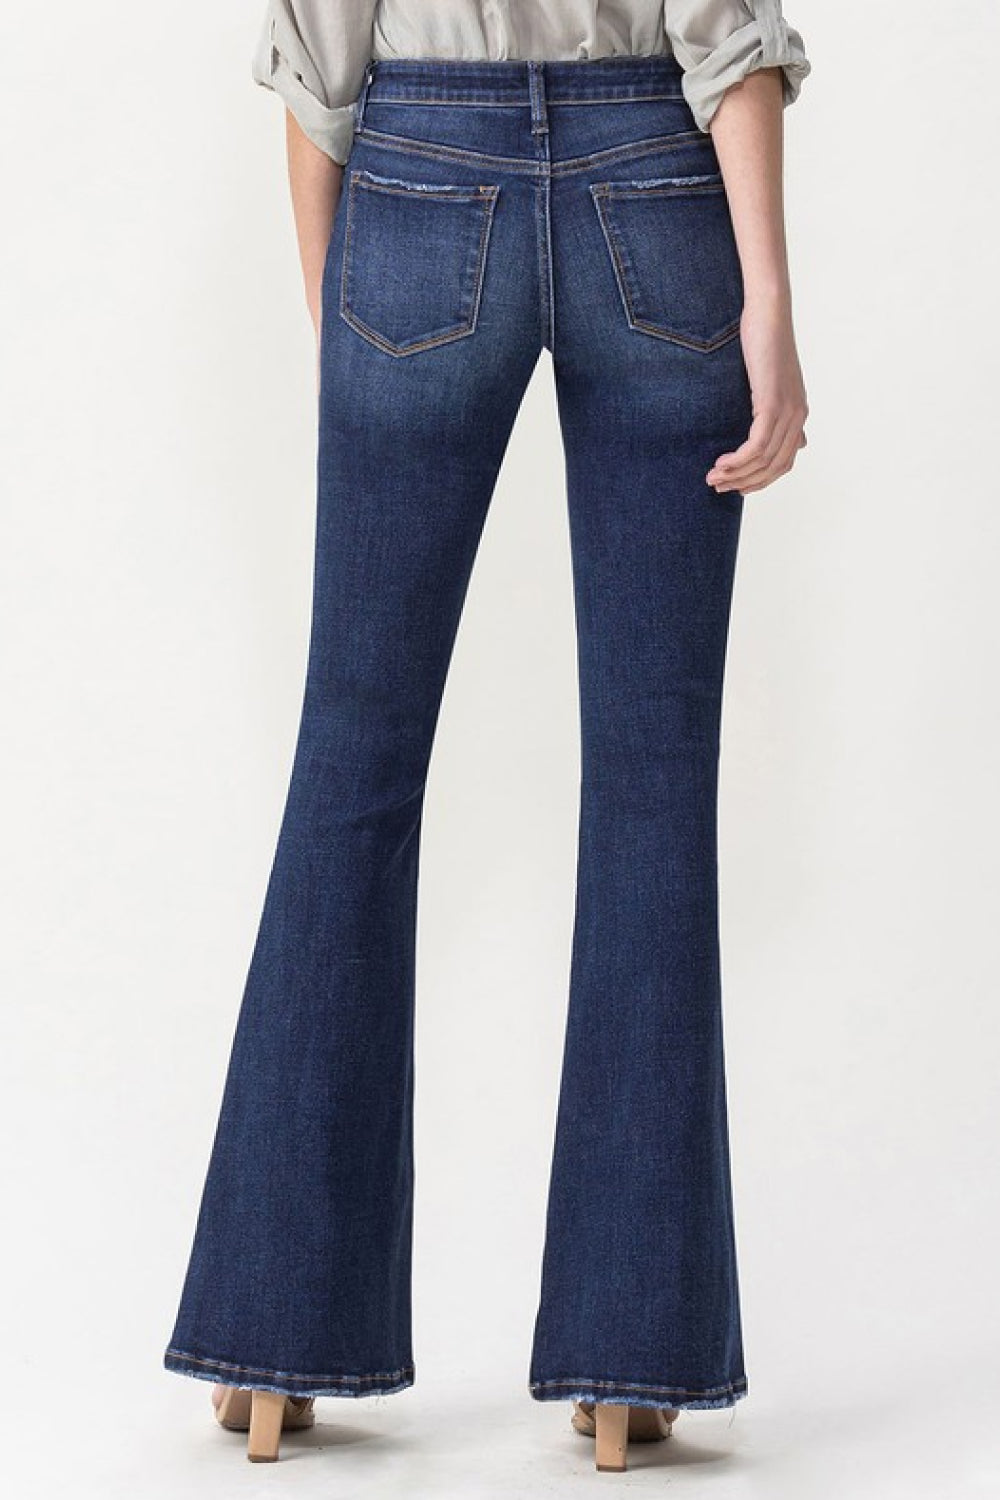 Lovervet Full Size Joanna Midrise Flare Jeans - Jeans - FITGGINS